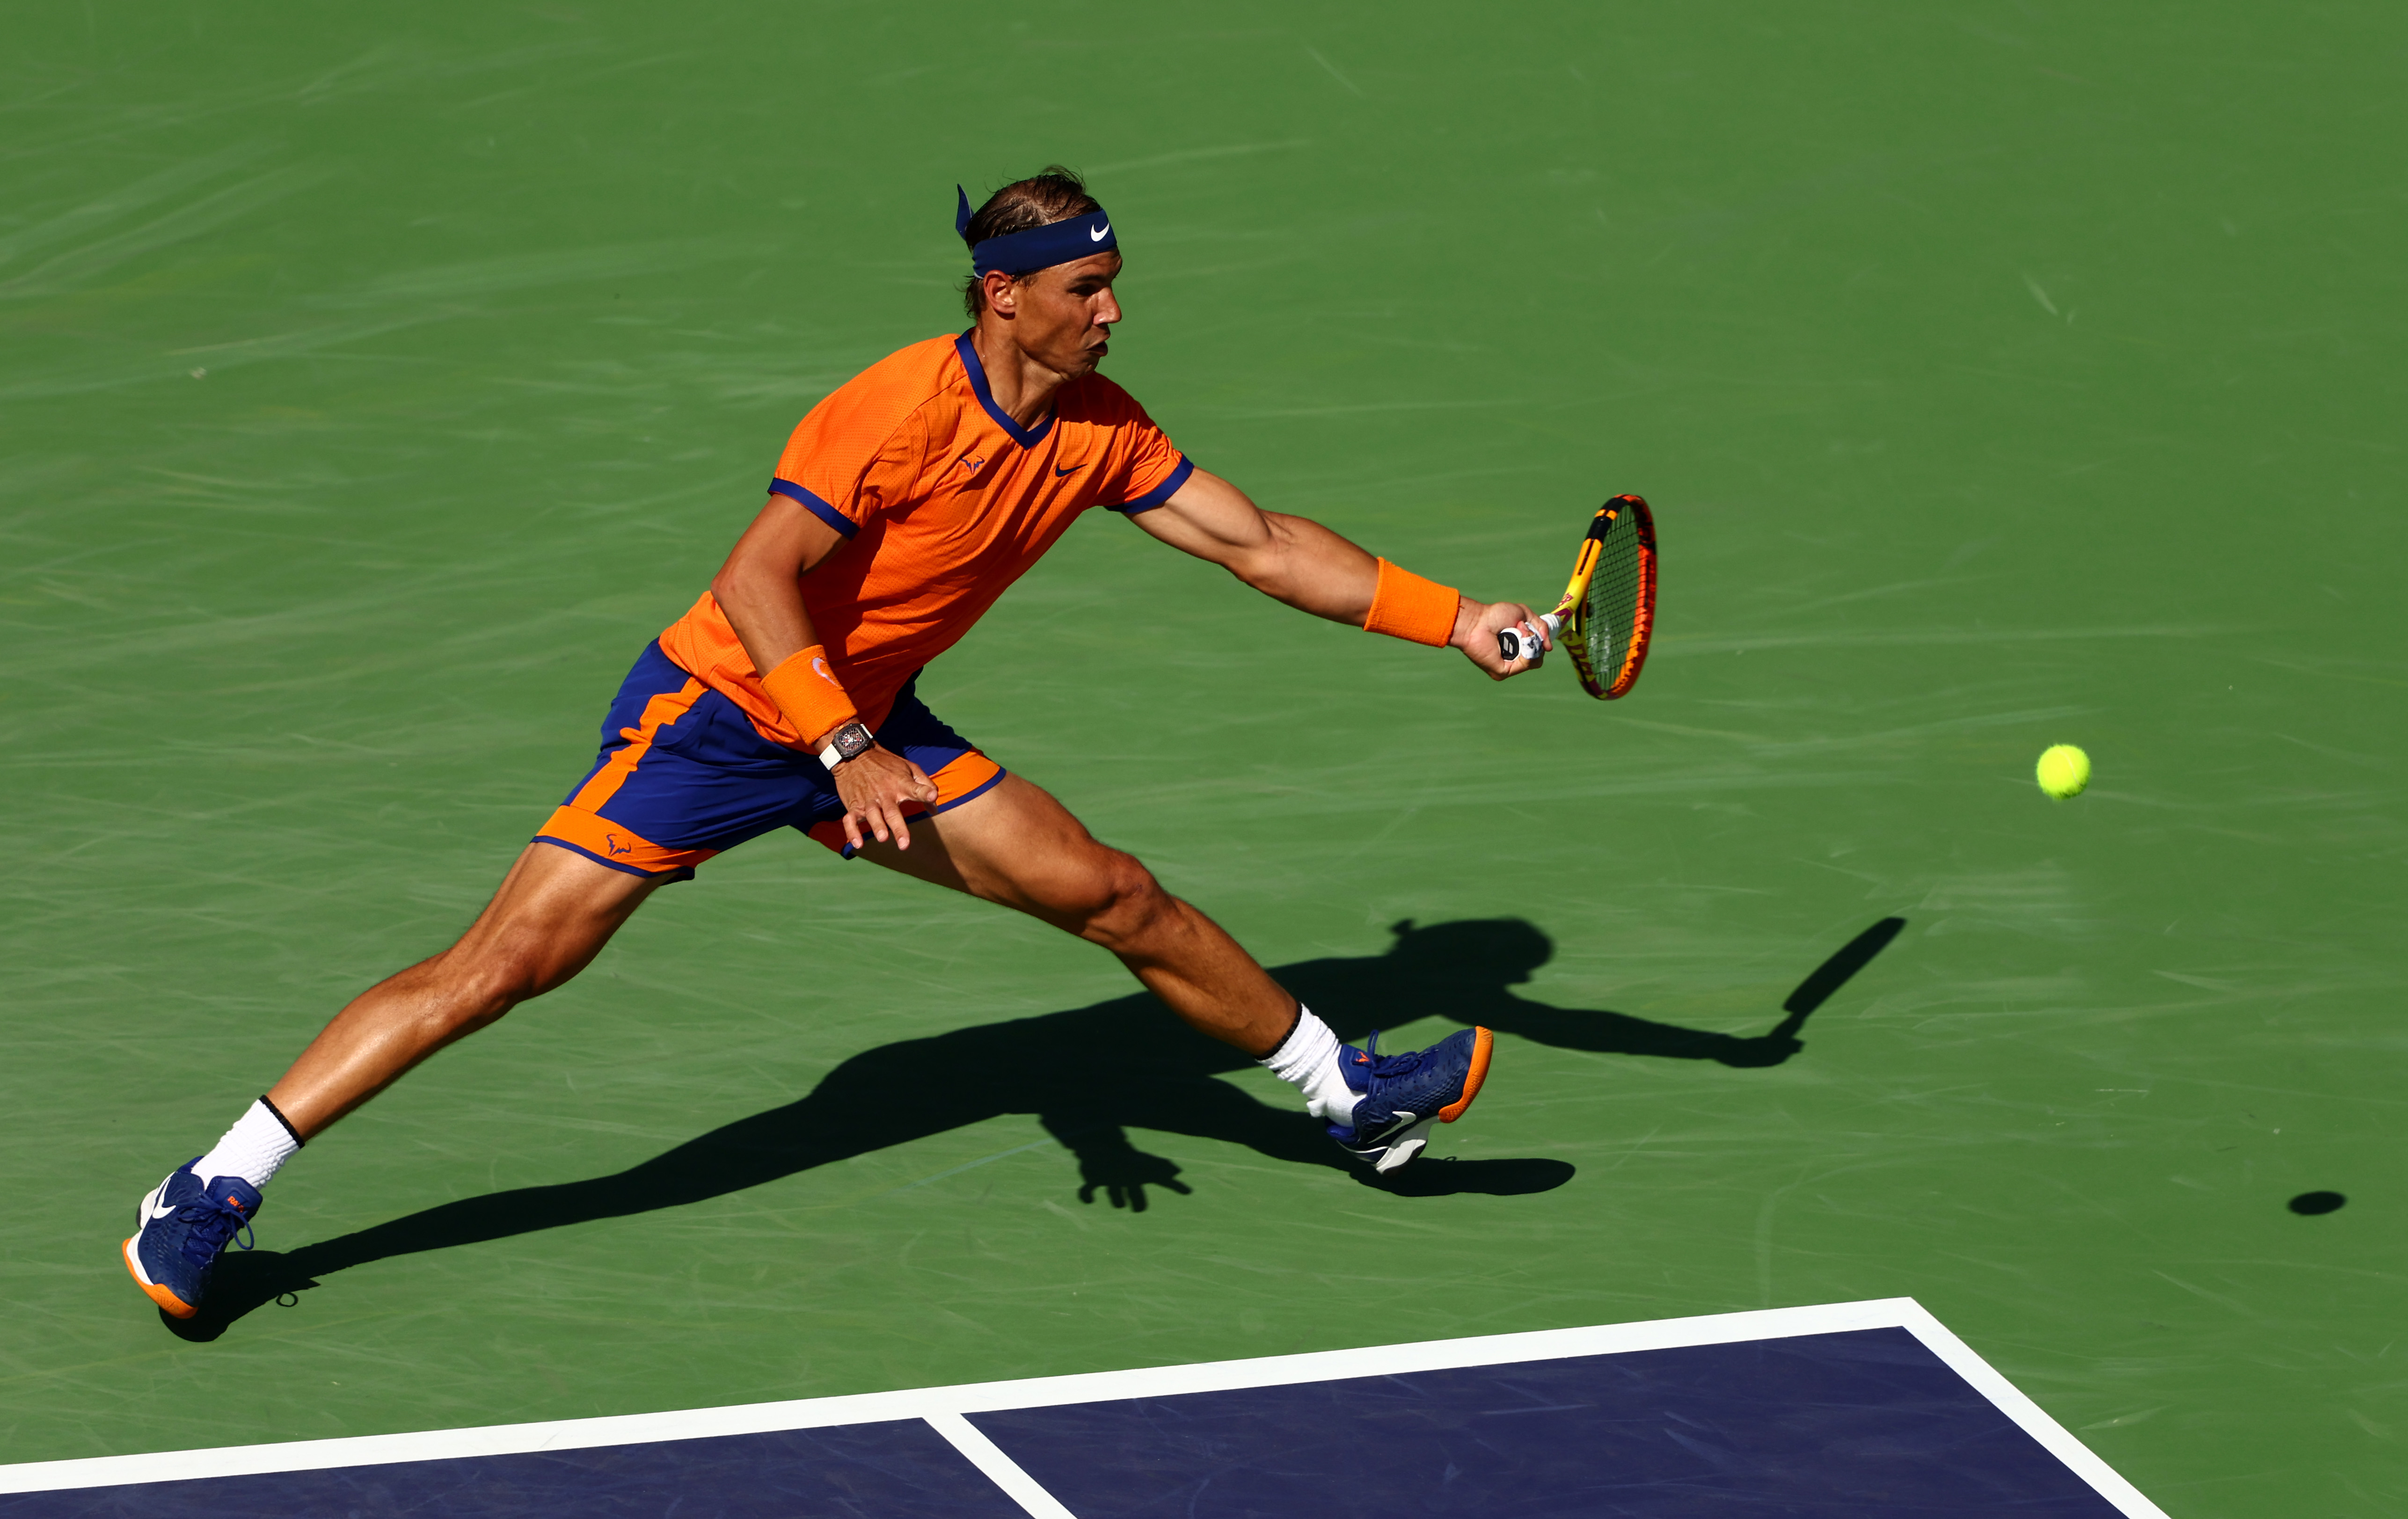 Rafael Nadal struck a complicated balance between safety and risk to beat big-serving Reilly Opelka at Indian Wells